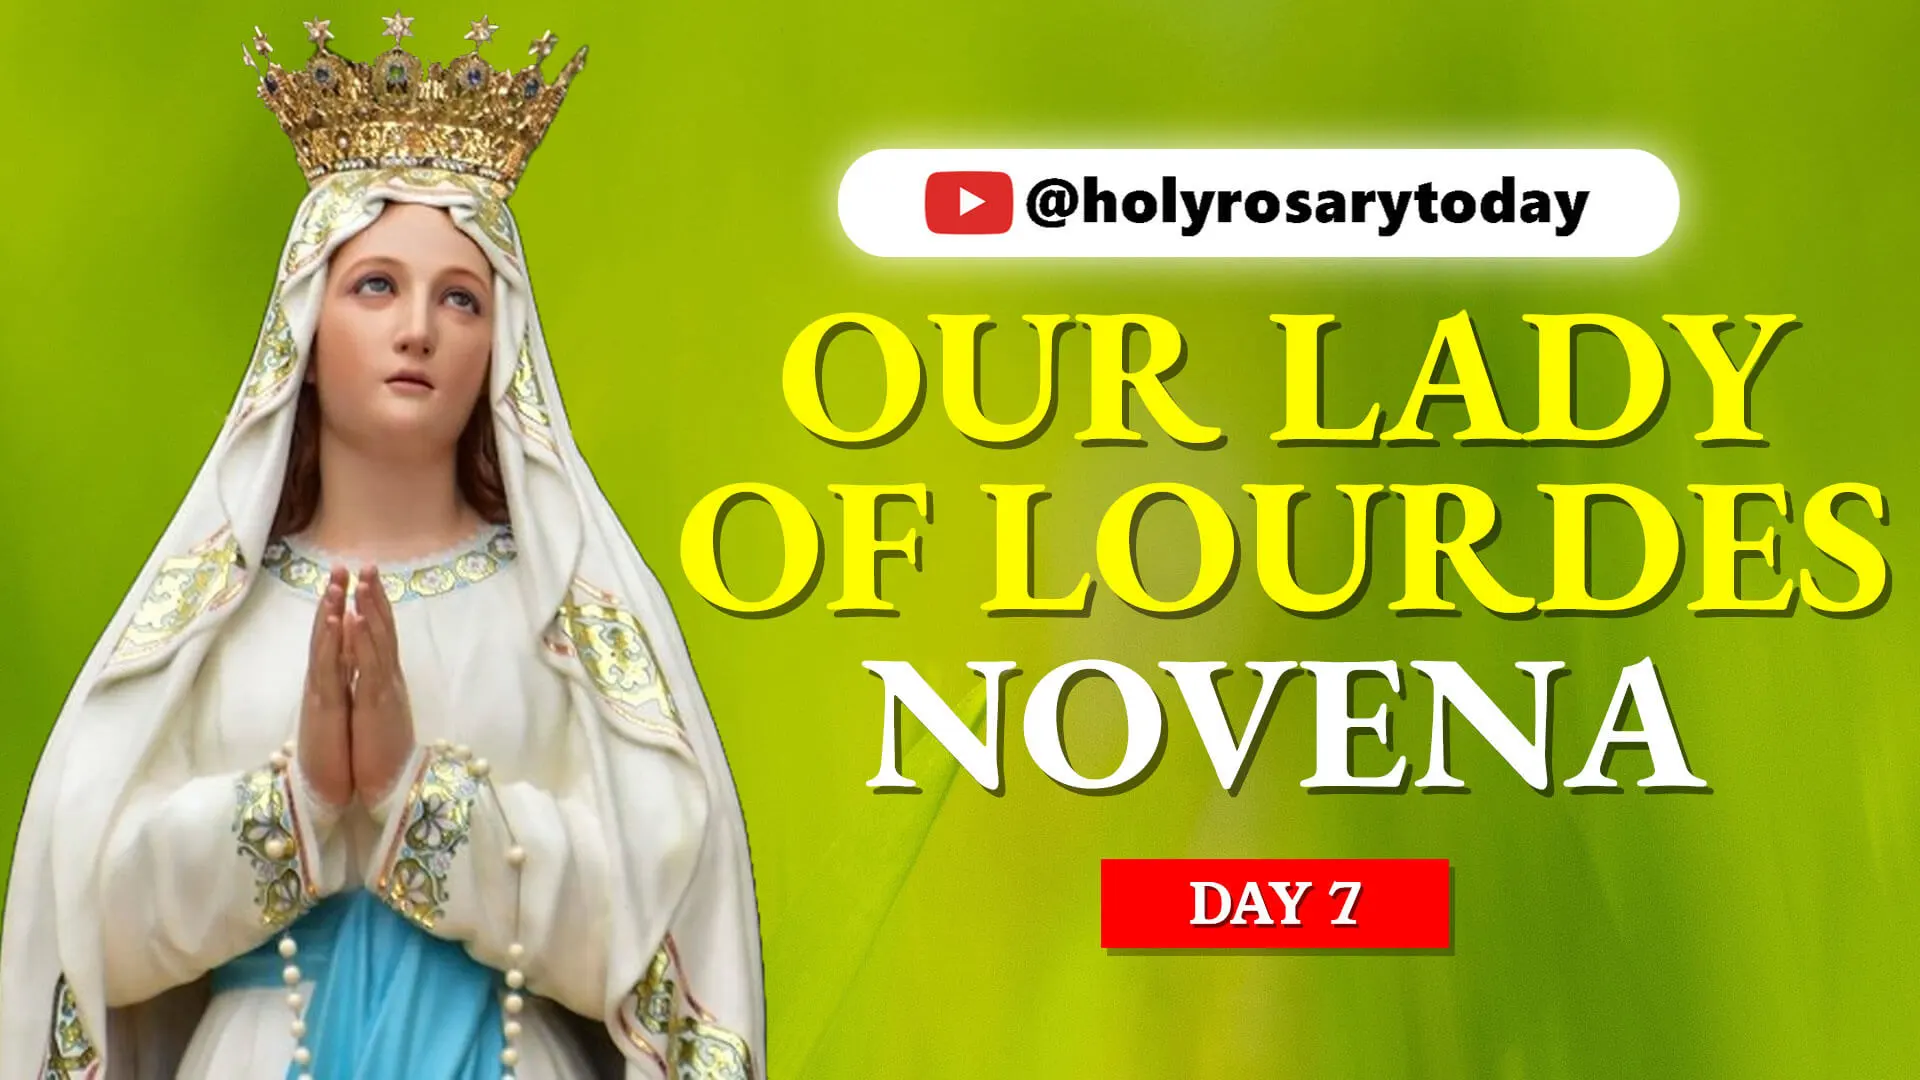 Our Lady of Lourdes Novena Day 7